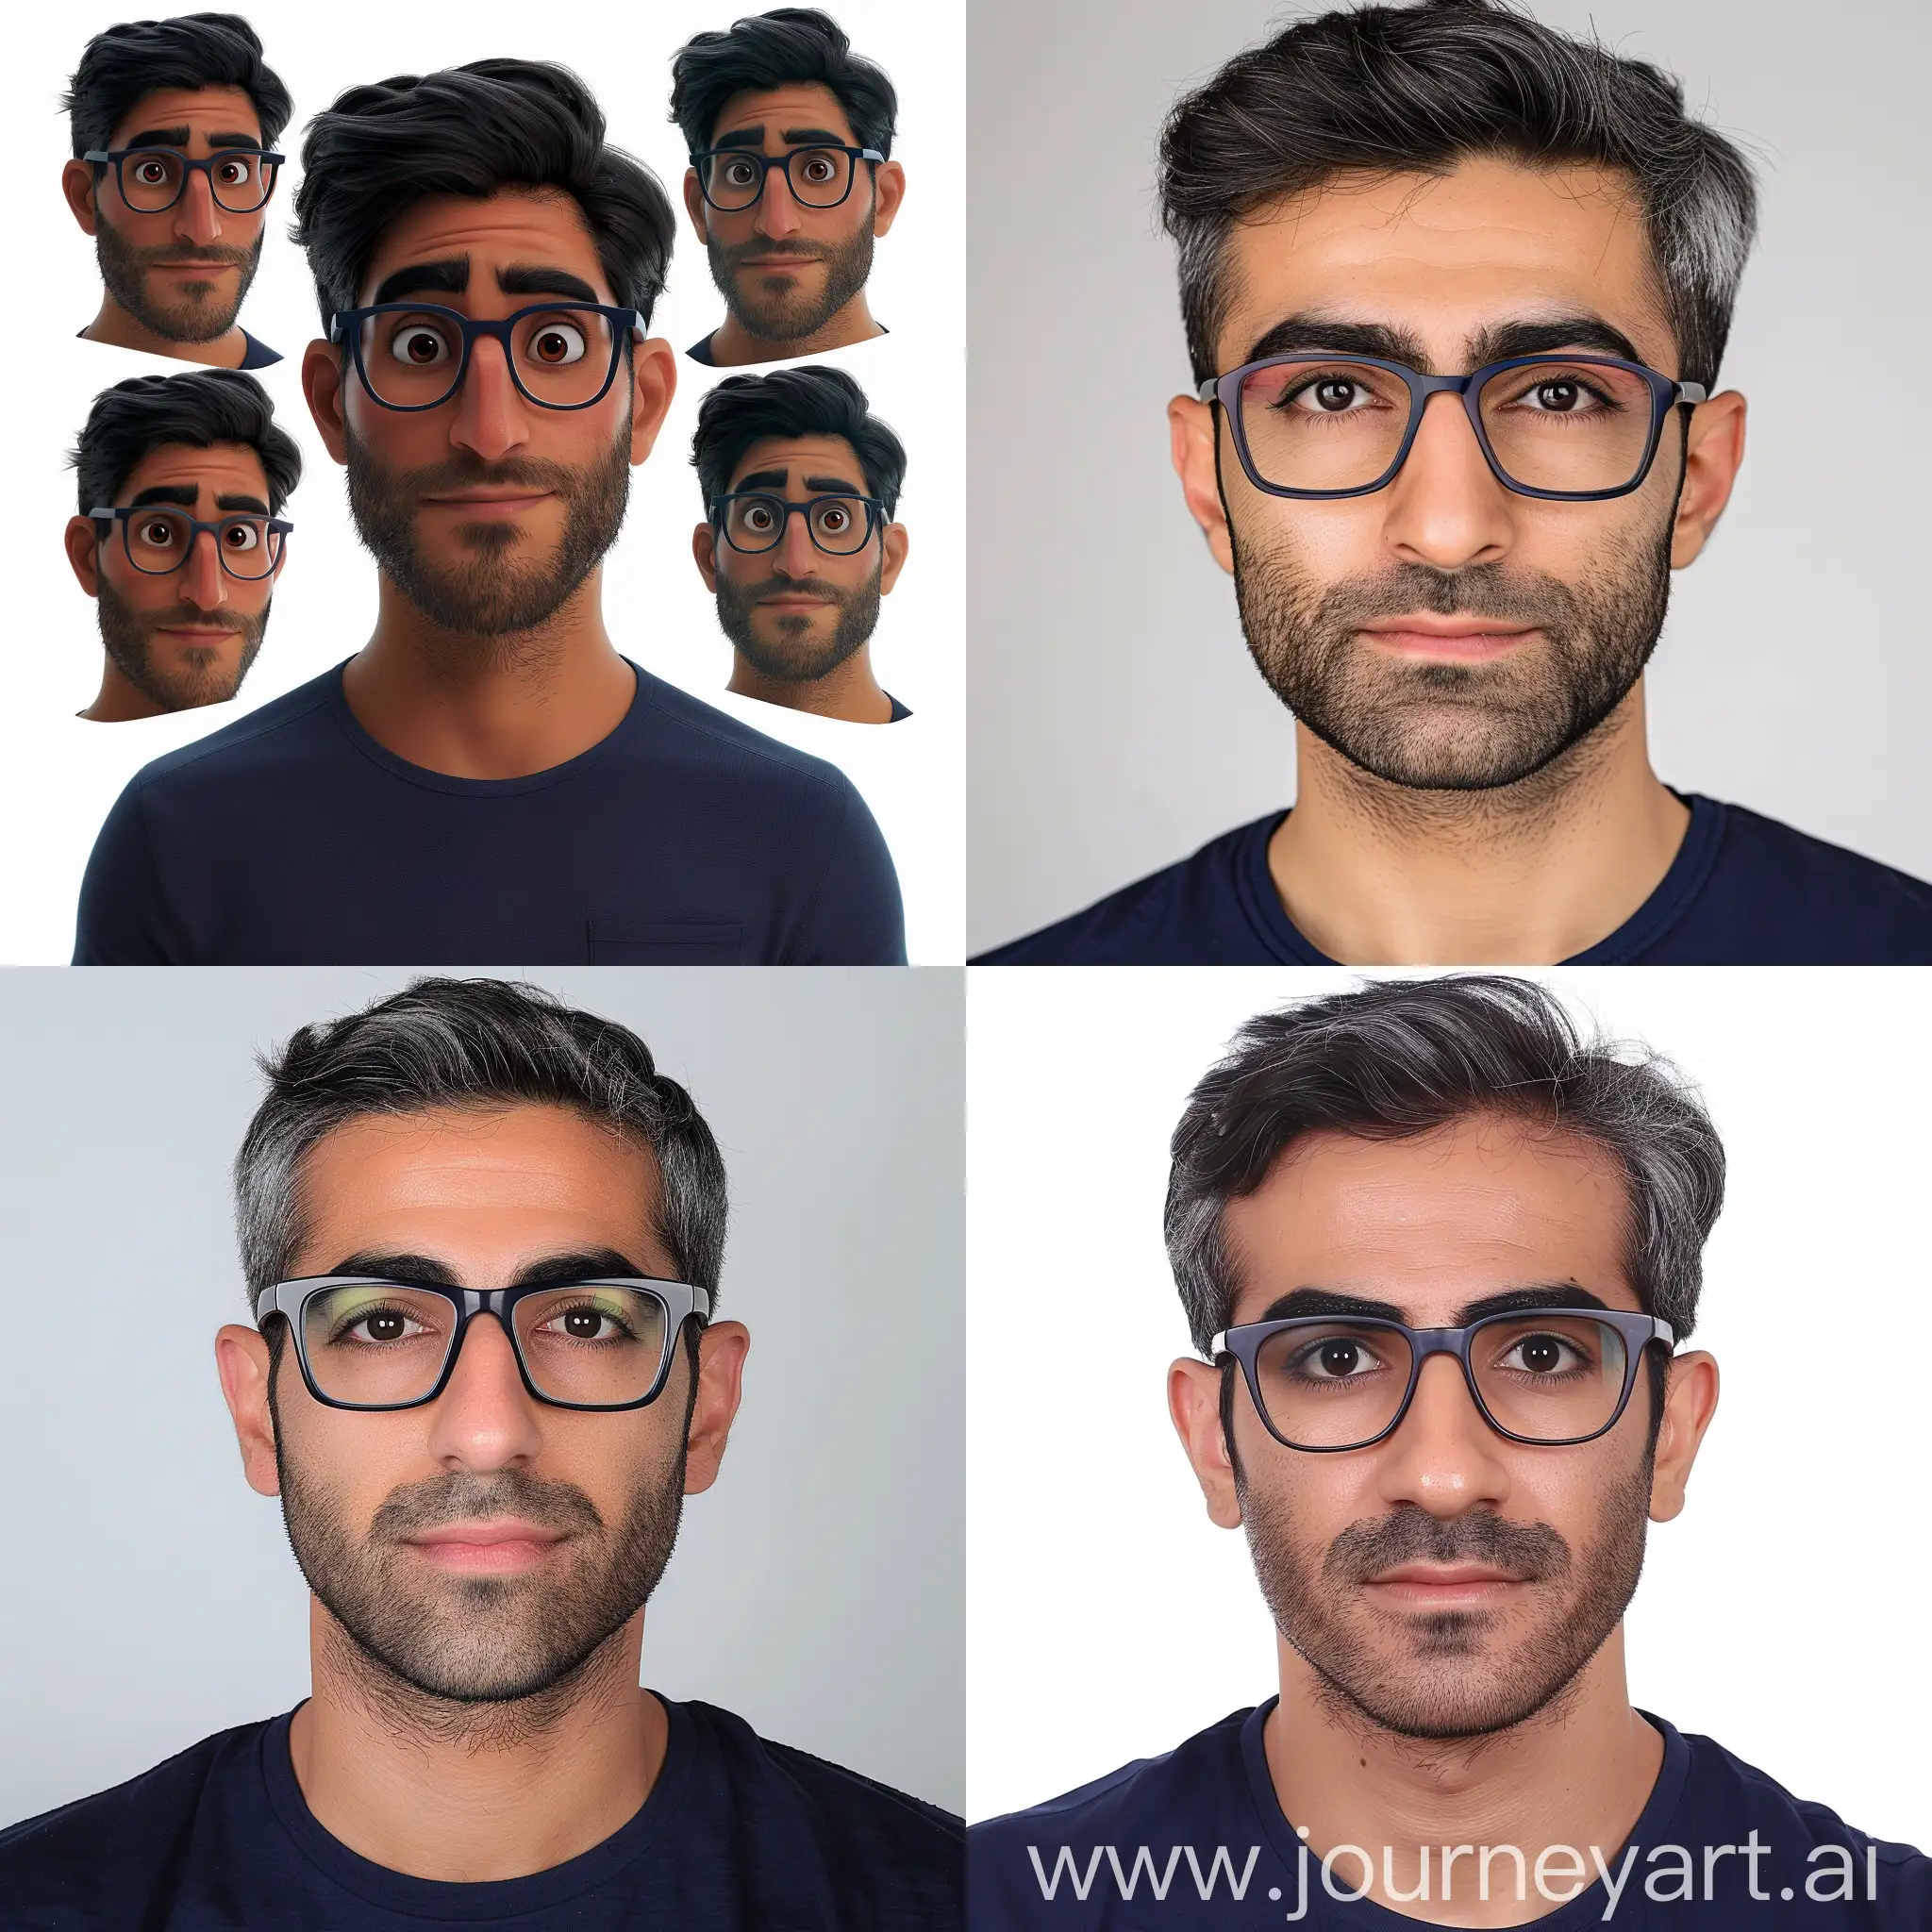 Disney pixar 5 styles of a 25 years old iranian man with Straight short dark hair, wearing rectangular frame glasses, wearing a navy blue shirt , front facing, black eyes, with stubble beard, looking straight into the camera, with small smile facial expression, charechter sheet, white background